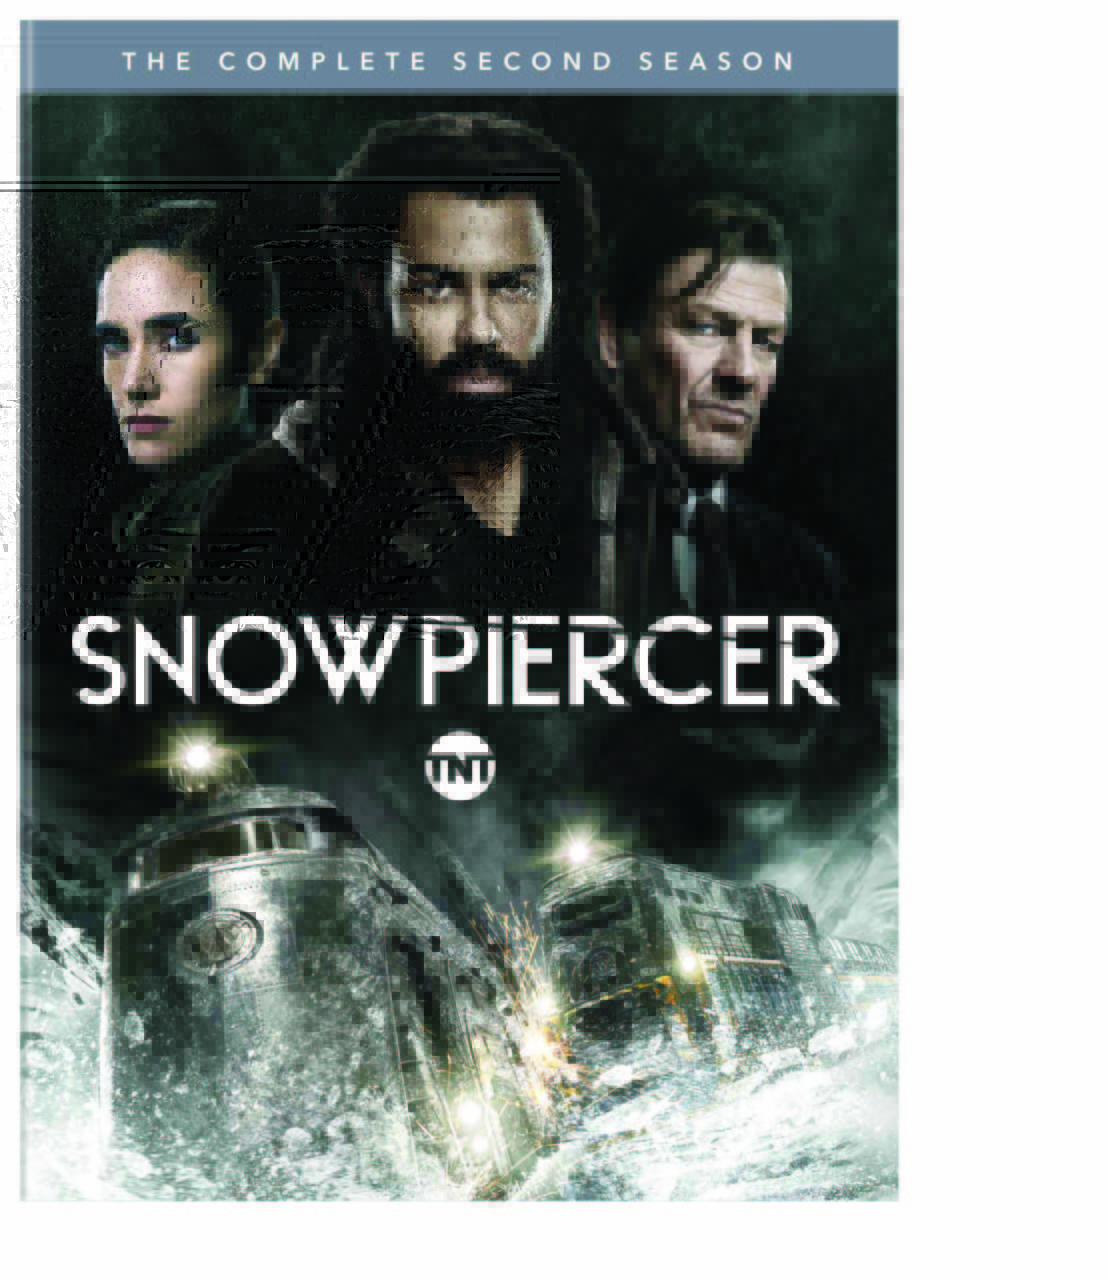 Snowpiercer: The Complete Second Season DVD cover (Warner Bros. Home Entertainment)